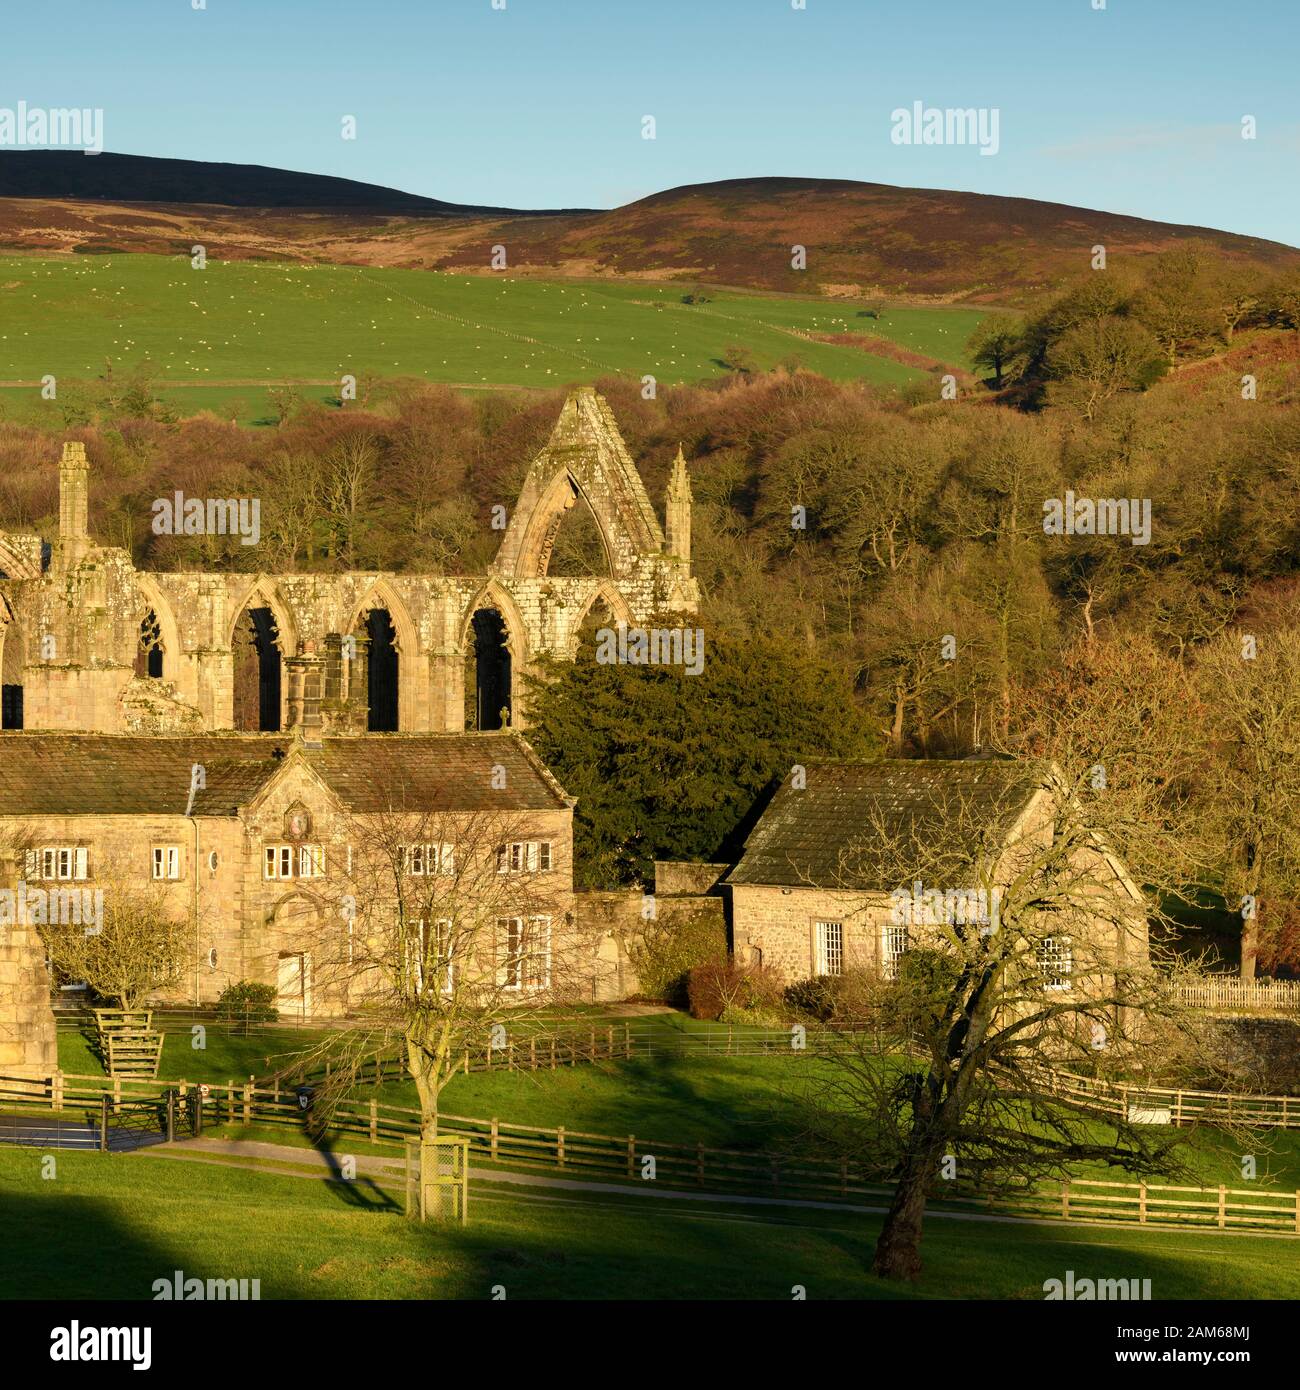 Scenic rural view of ancient, picturesque monastic priory ruins, historic  Old Rectory & sunlit fells - Bolton Abbey, Yorkshire Dales, England, UK. Stock Photo